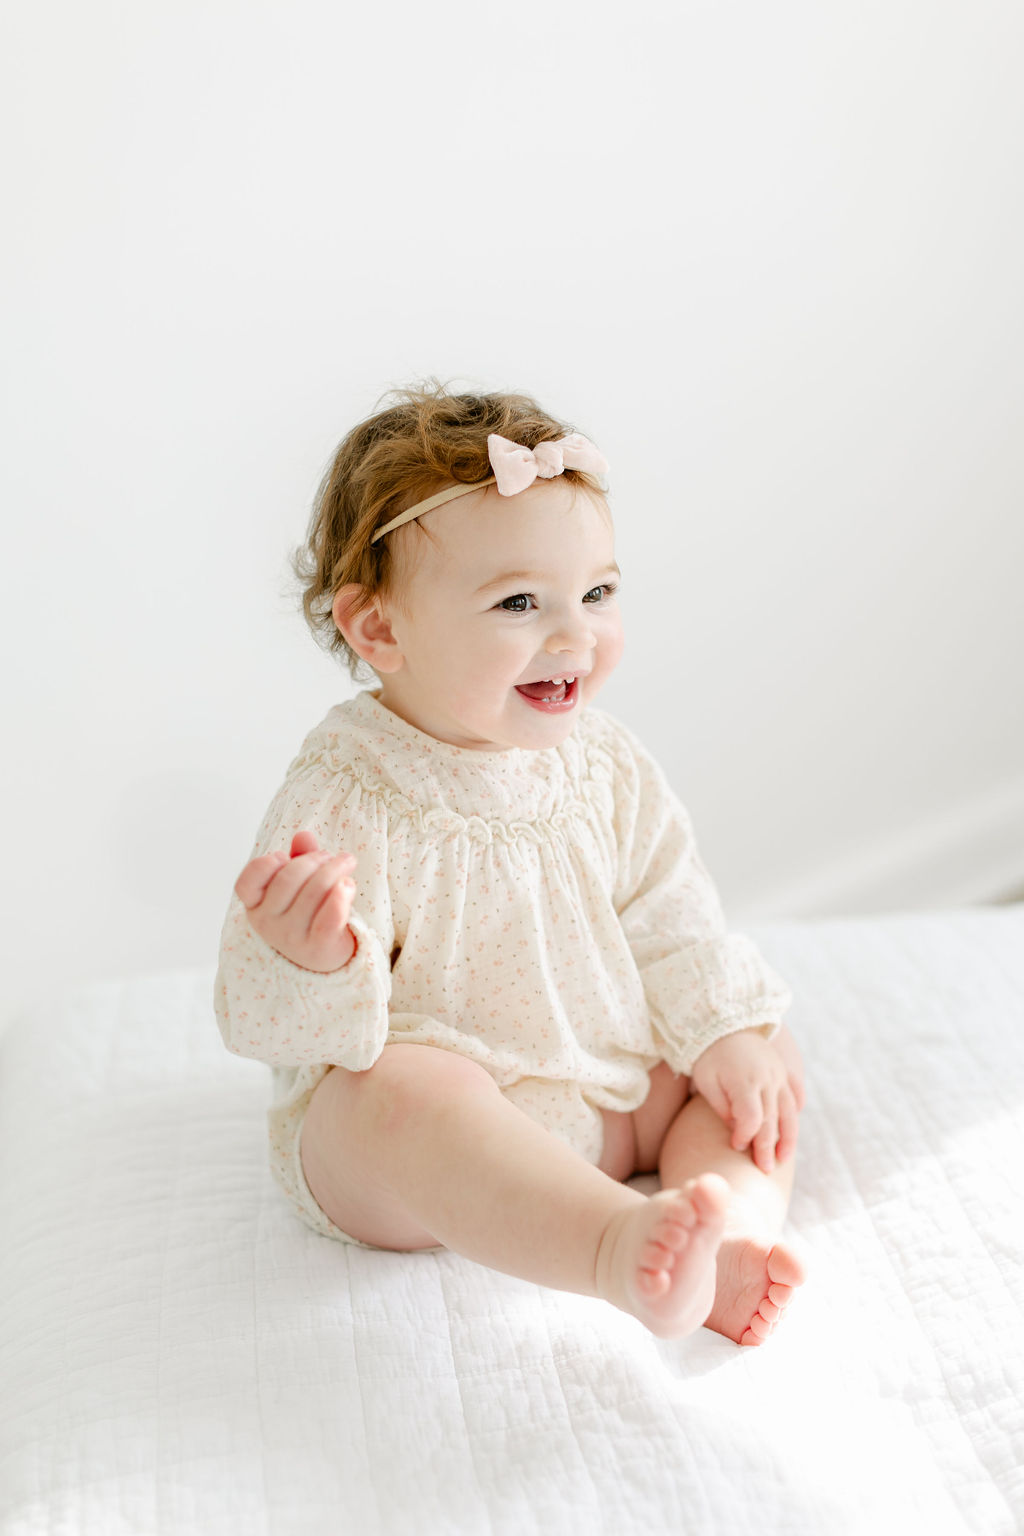 A happy infant girl sits on a bed smiling and laughing in a pink bow